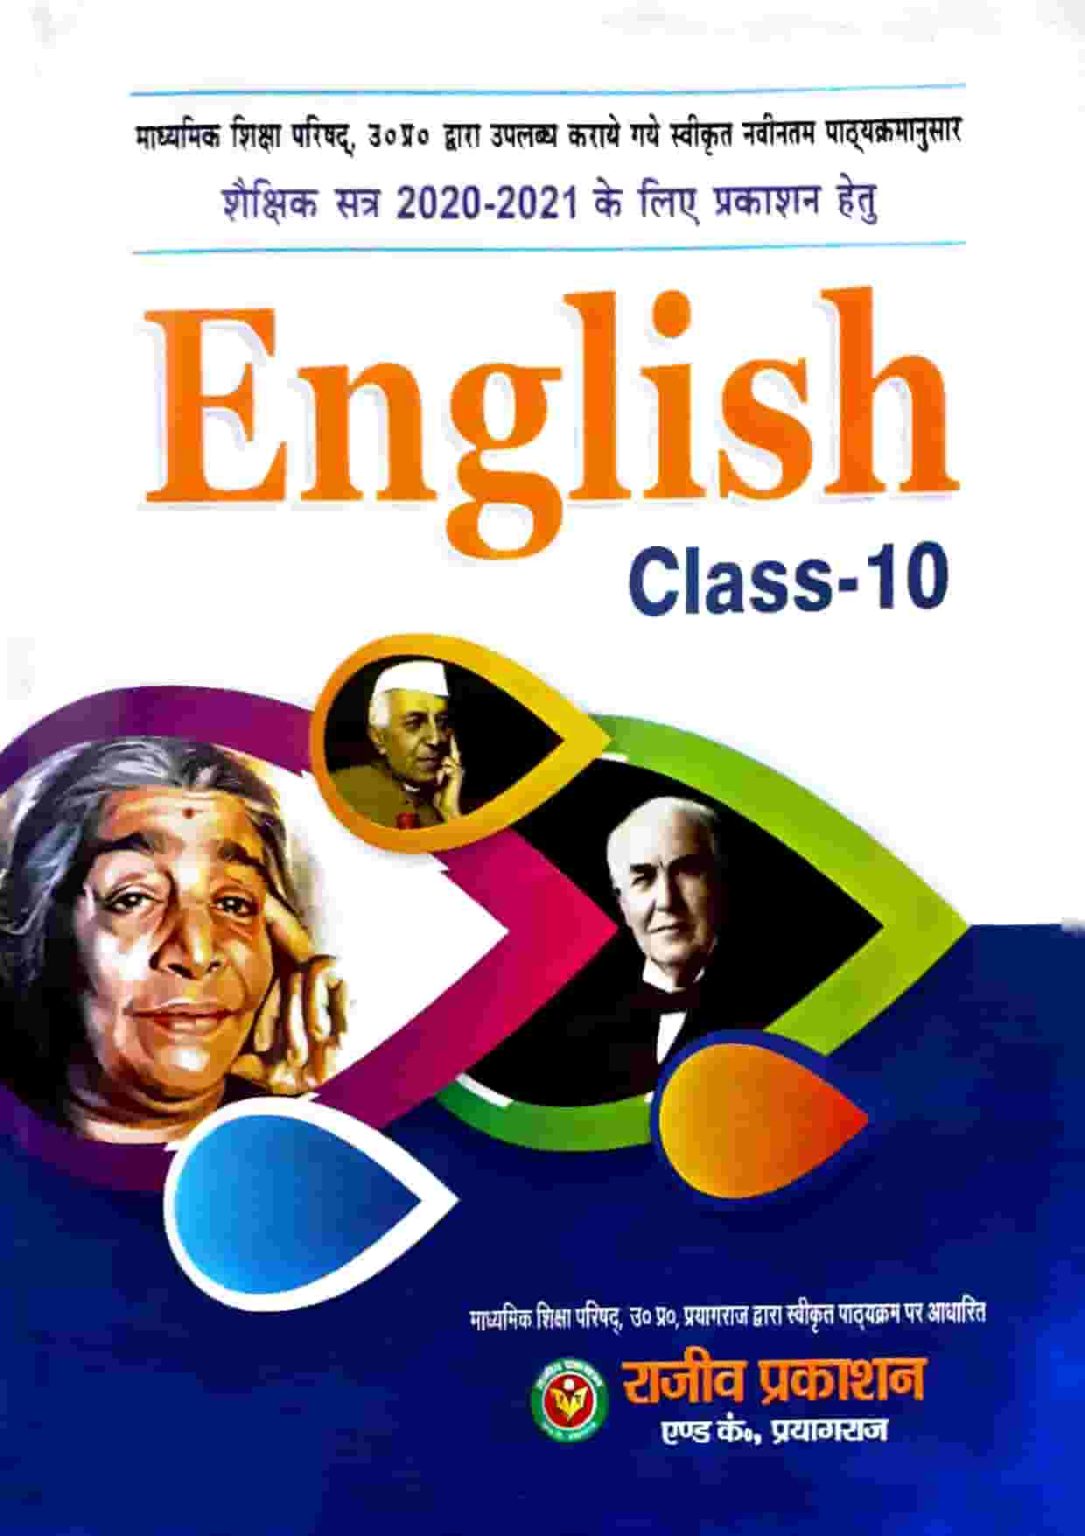 Ncert Books For Class 11 English 2020 21 Download Pdf Here - Riset